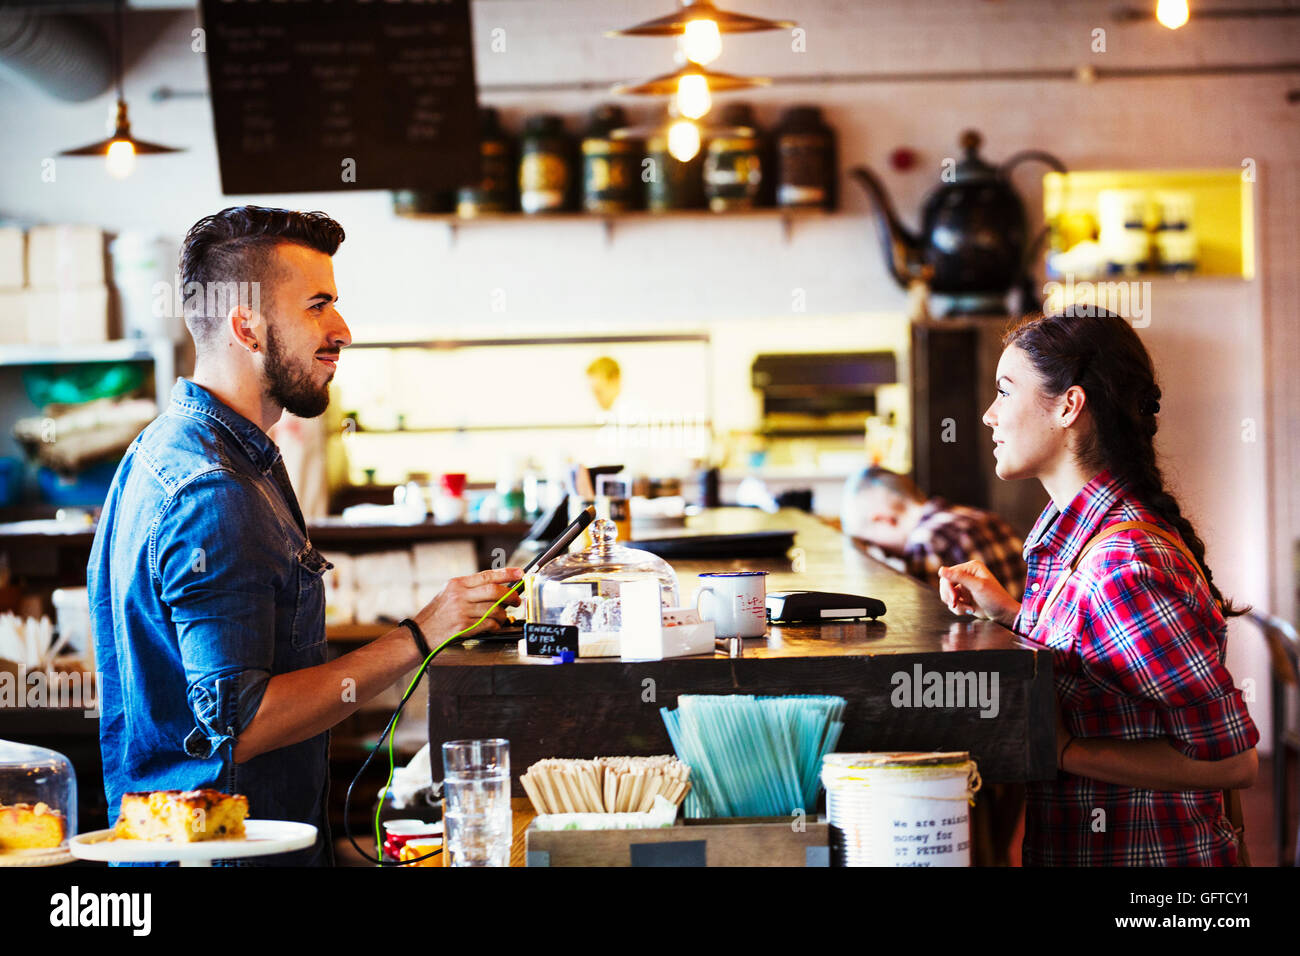 A man behind the counter using a touch screen to record transactions and a woman customer Stock Photo